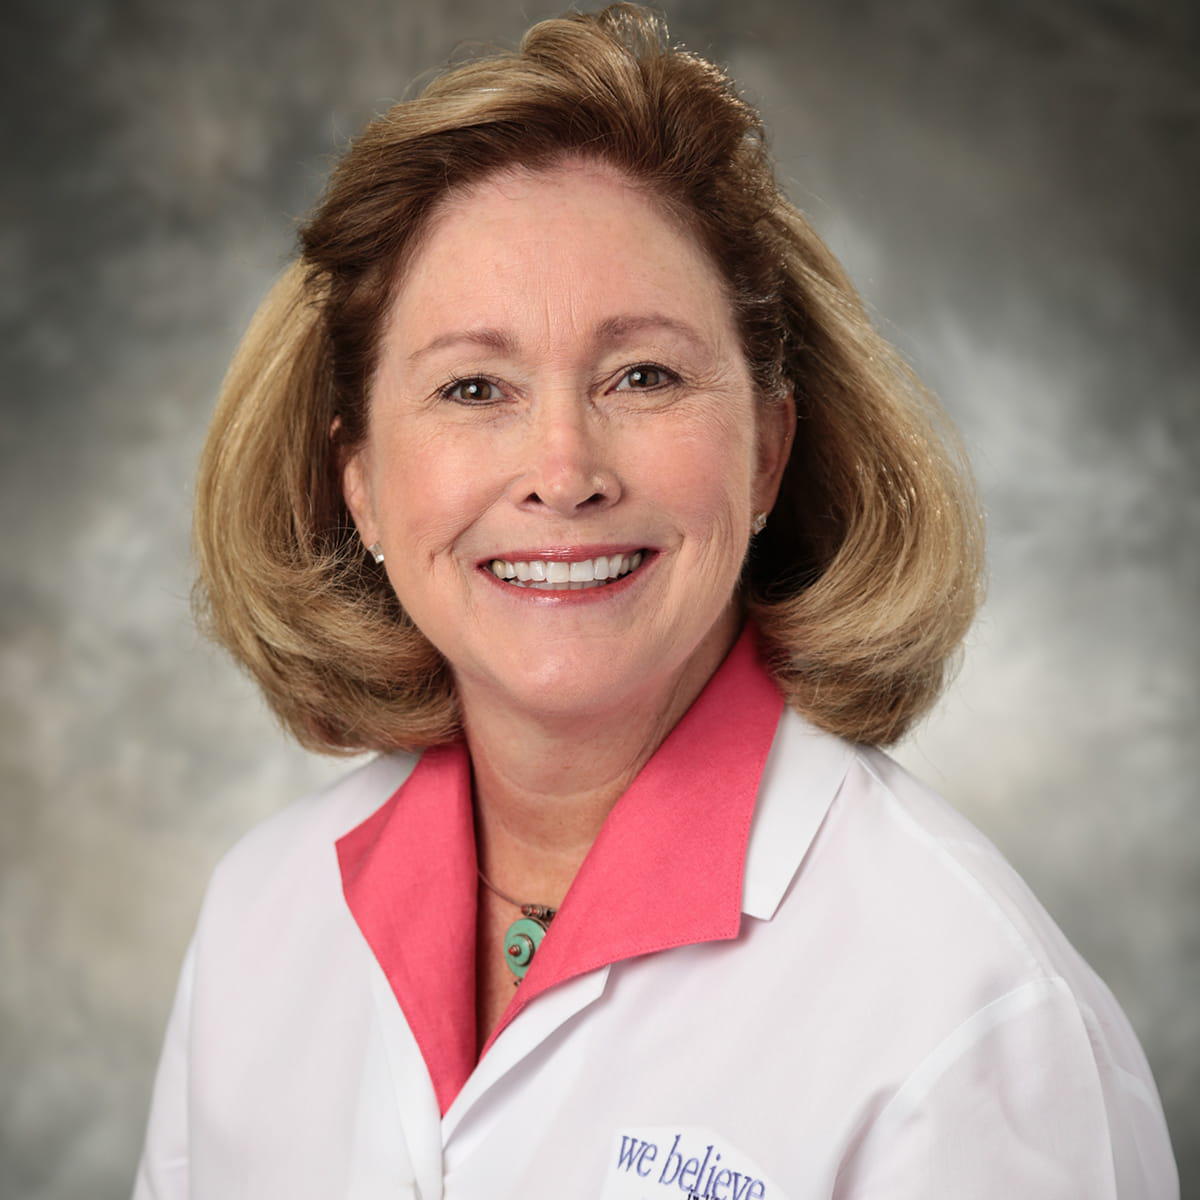 Dr. Mary Knoblock Gearhard